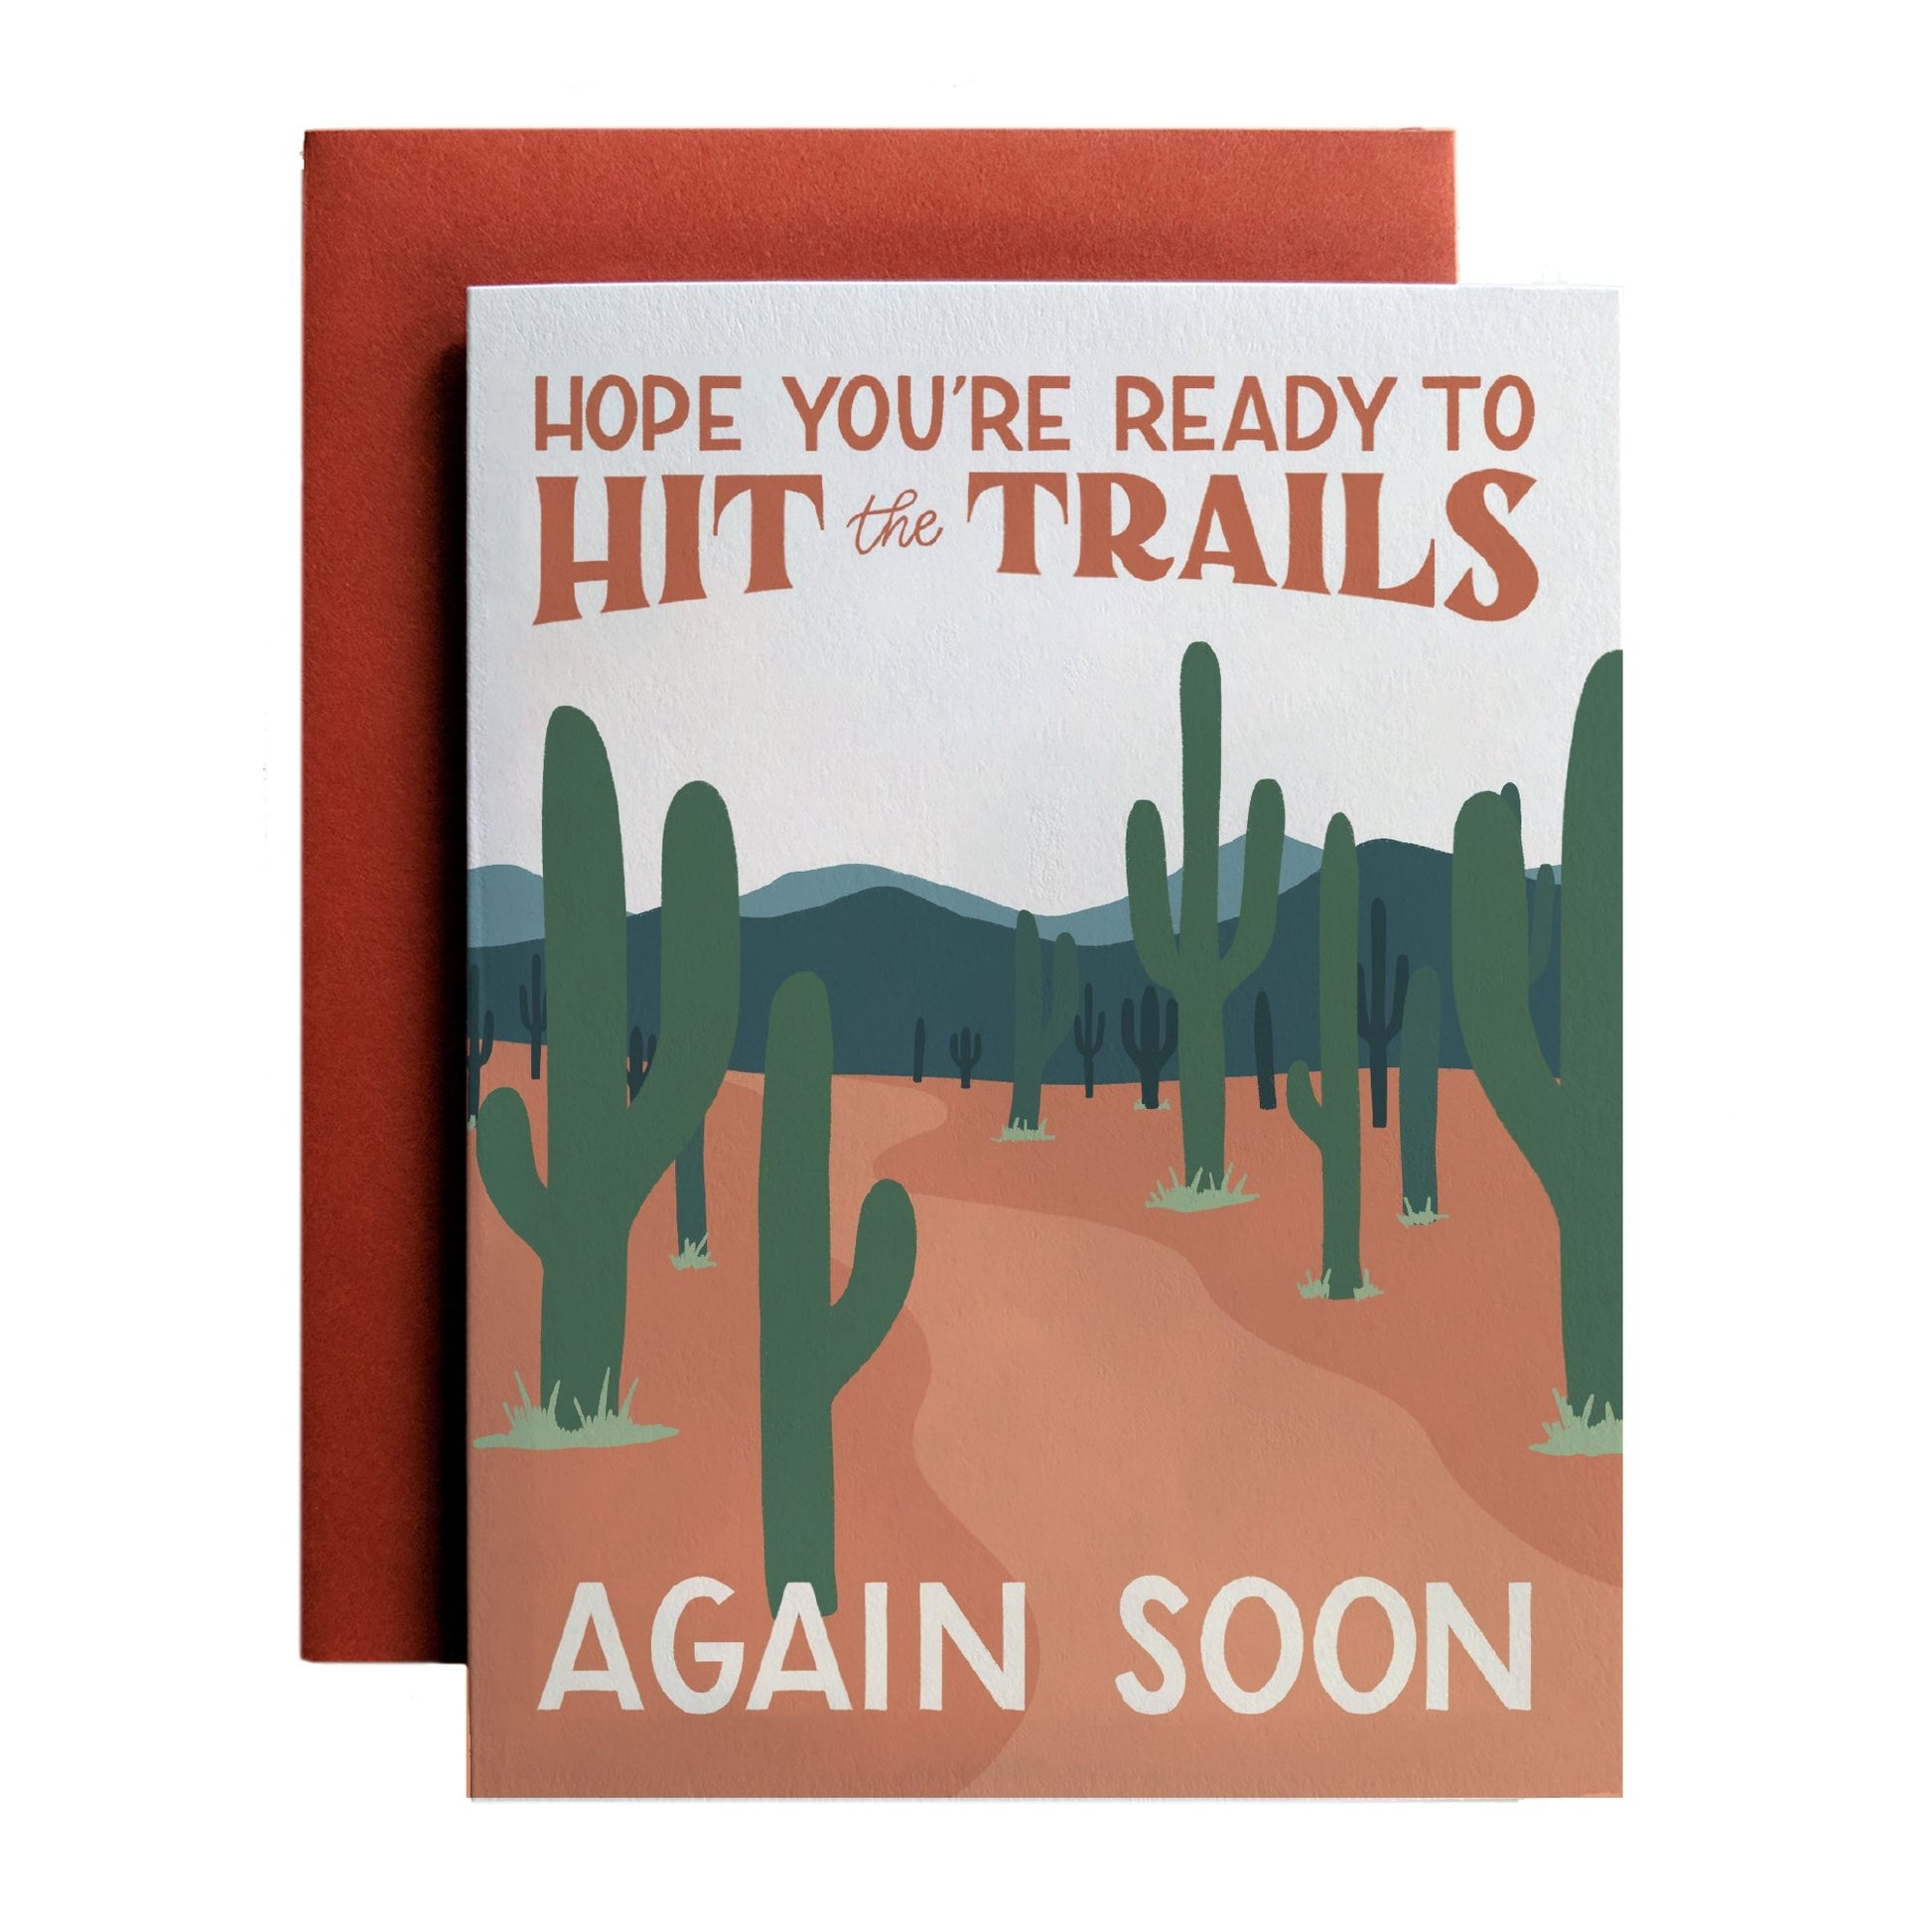 Hope You're Ready to Hit the Trails Again Soon - Amber Share Design---